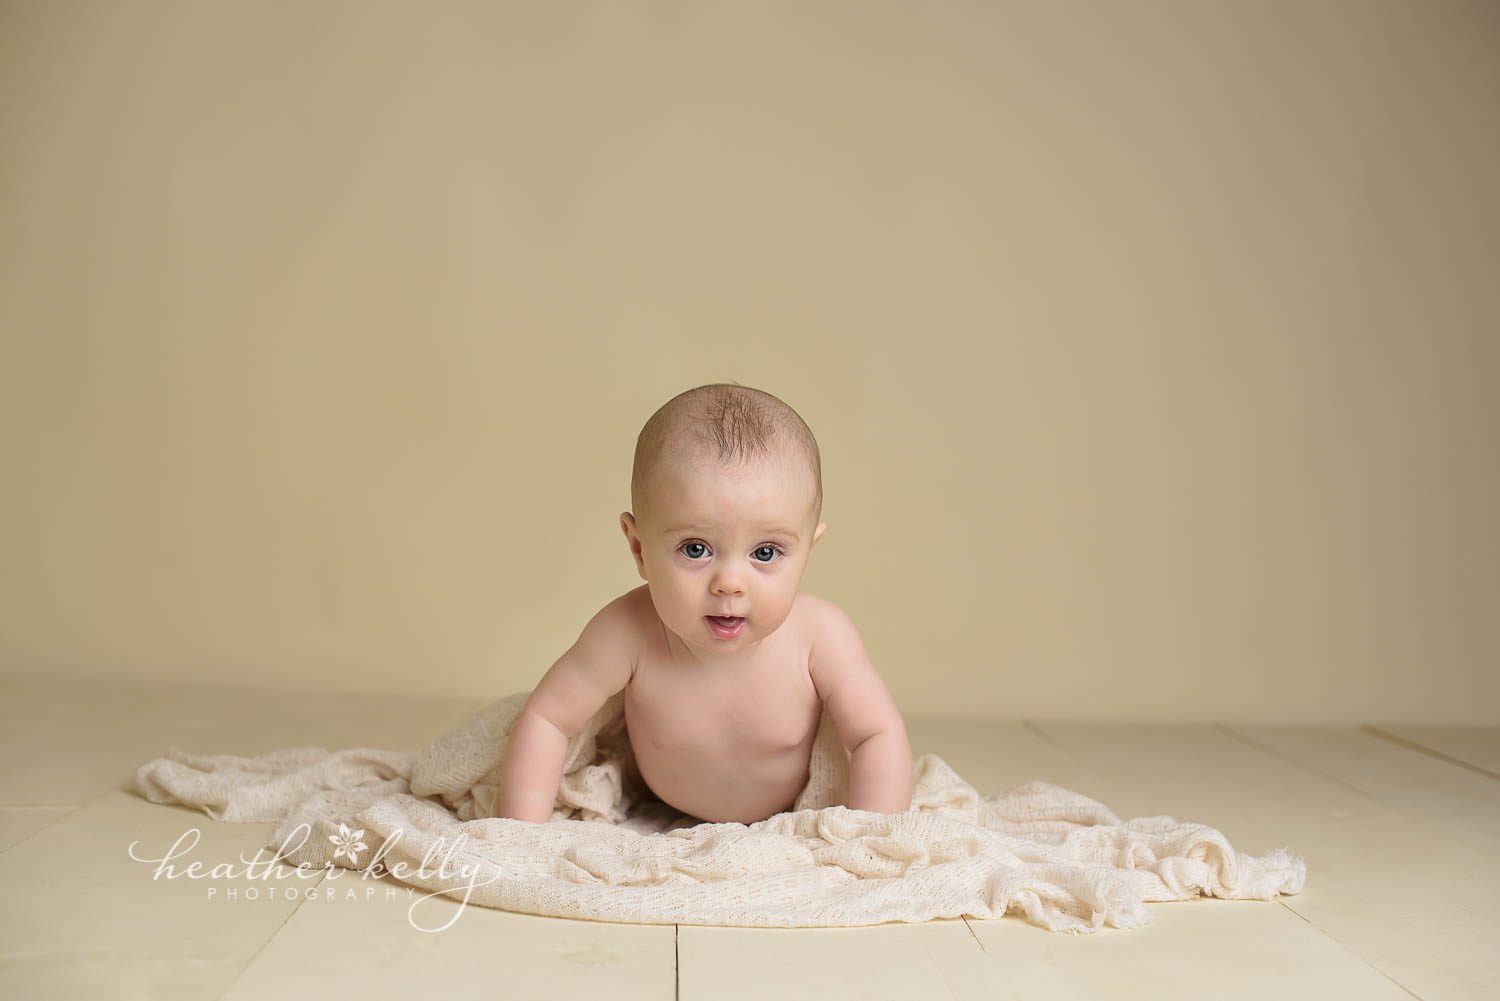 7 month boy tumming time photo. newtown baby boy by ct photographer heather kelly photography.